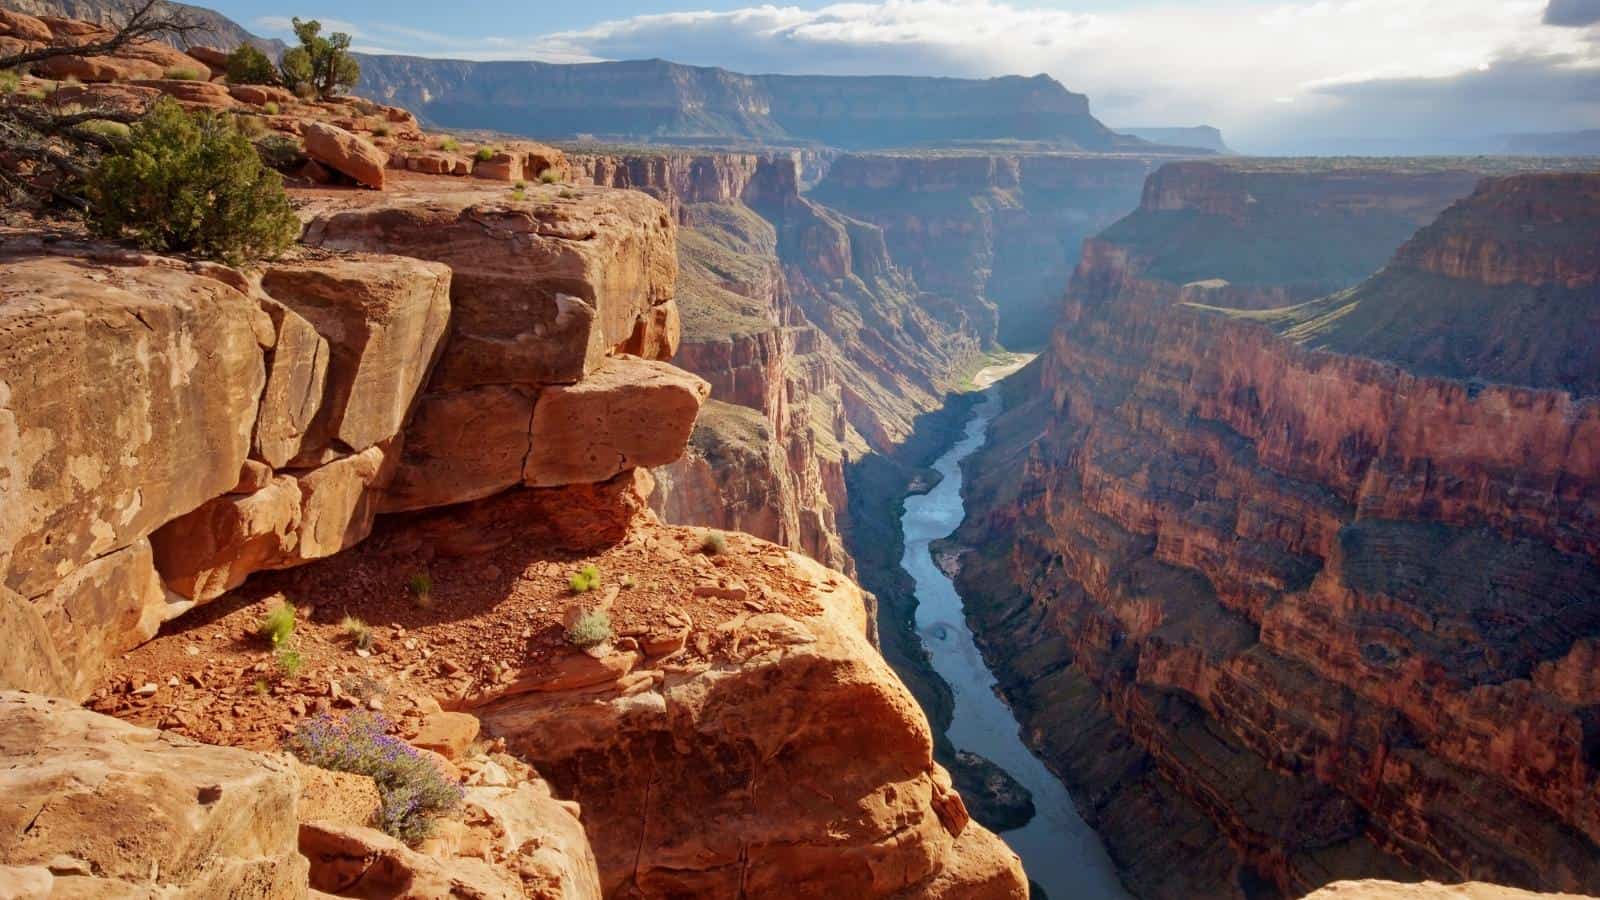 <p>The United States is home to so many natural wonders. There are great canyons, lakes, and mountains across the entirety of the country. With so many natural wonders, there’s plenty to explore in the comfort of your own country. So, why not start planning your next road trip to the next natural wonder?</p>